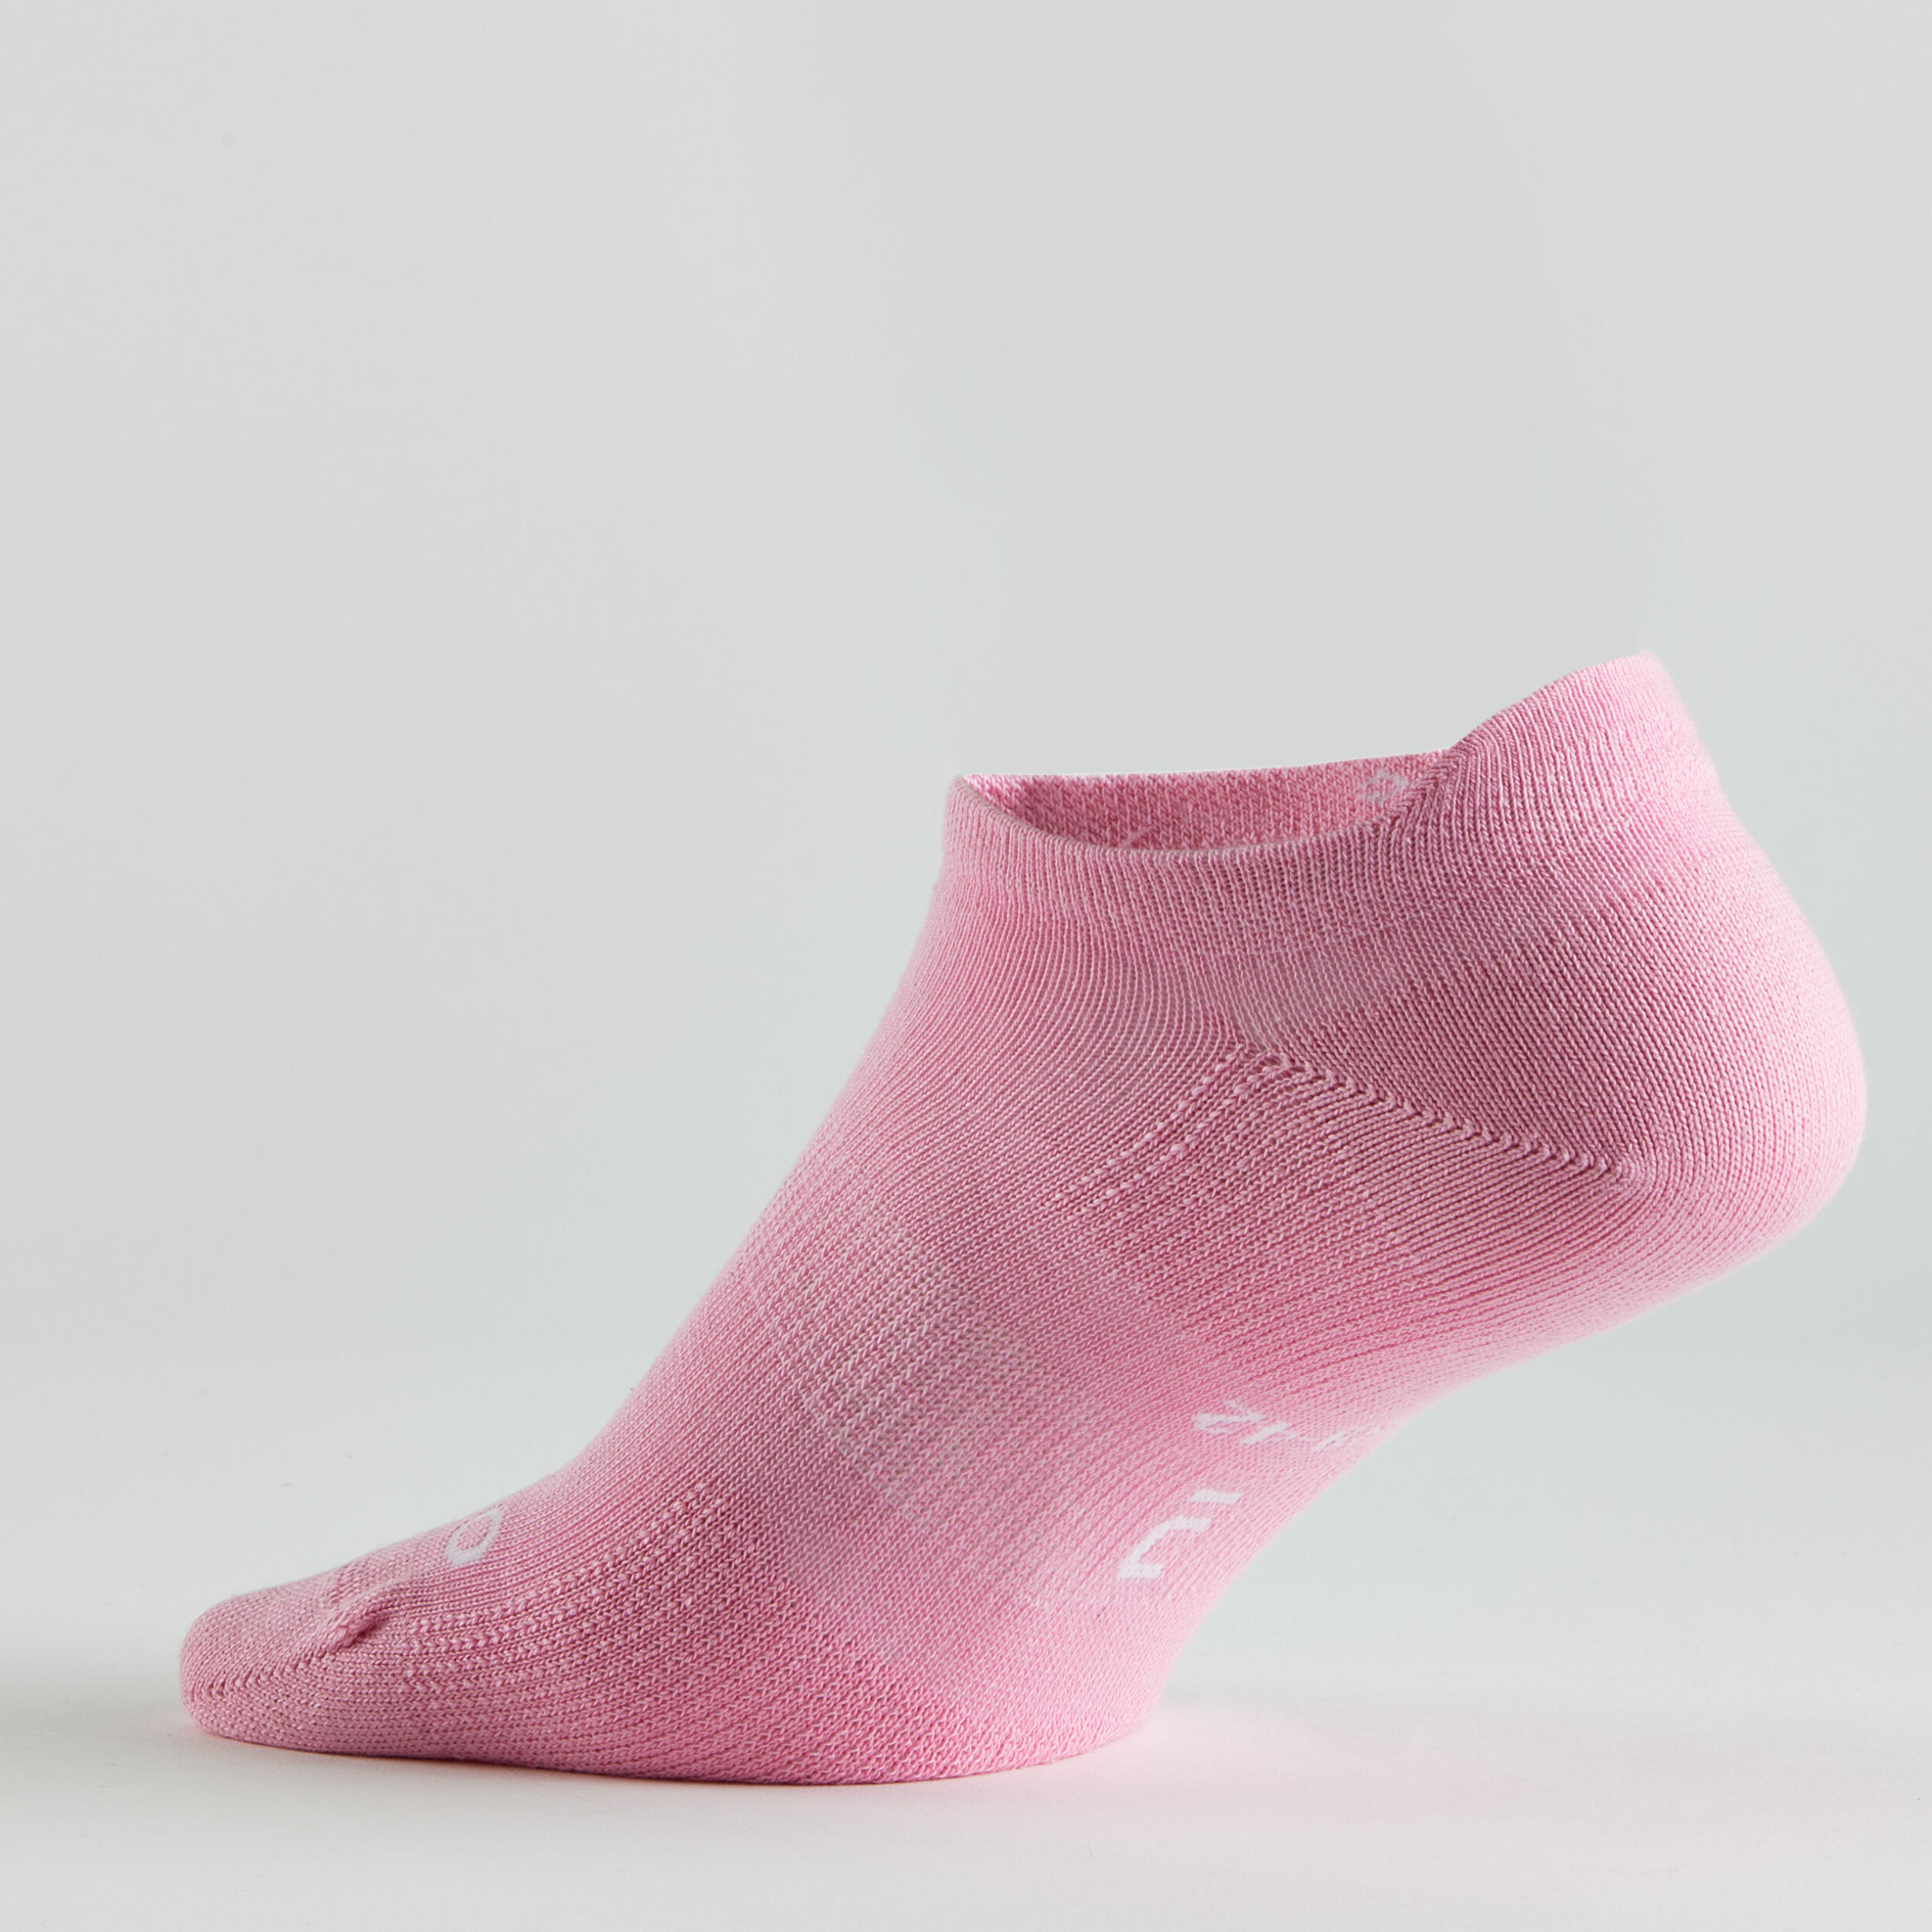 Low Sports Socks RS 160 Tri-Pack - Apricot/Pink/Navy 9/14